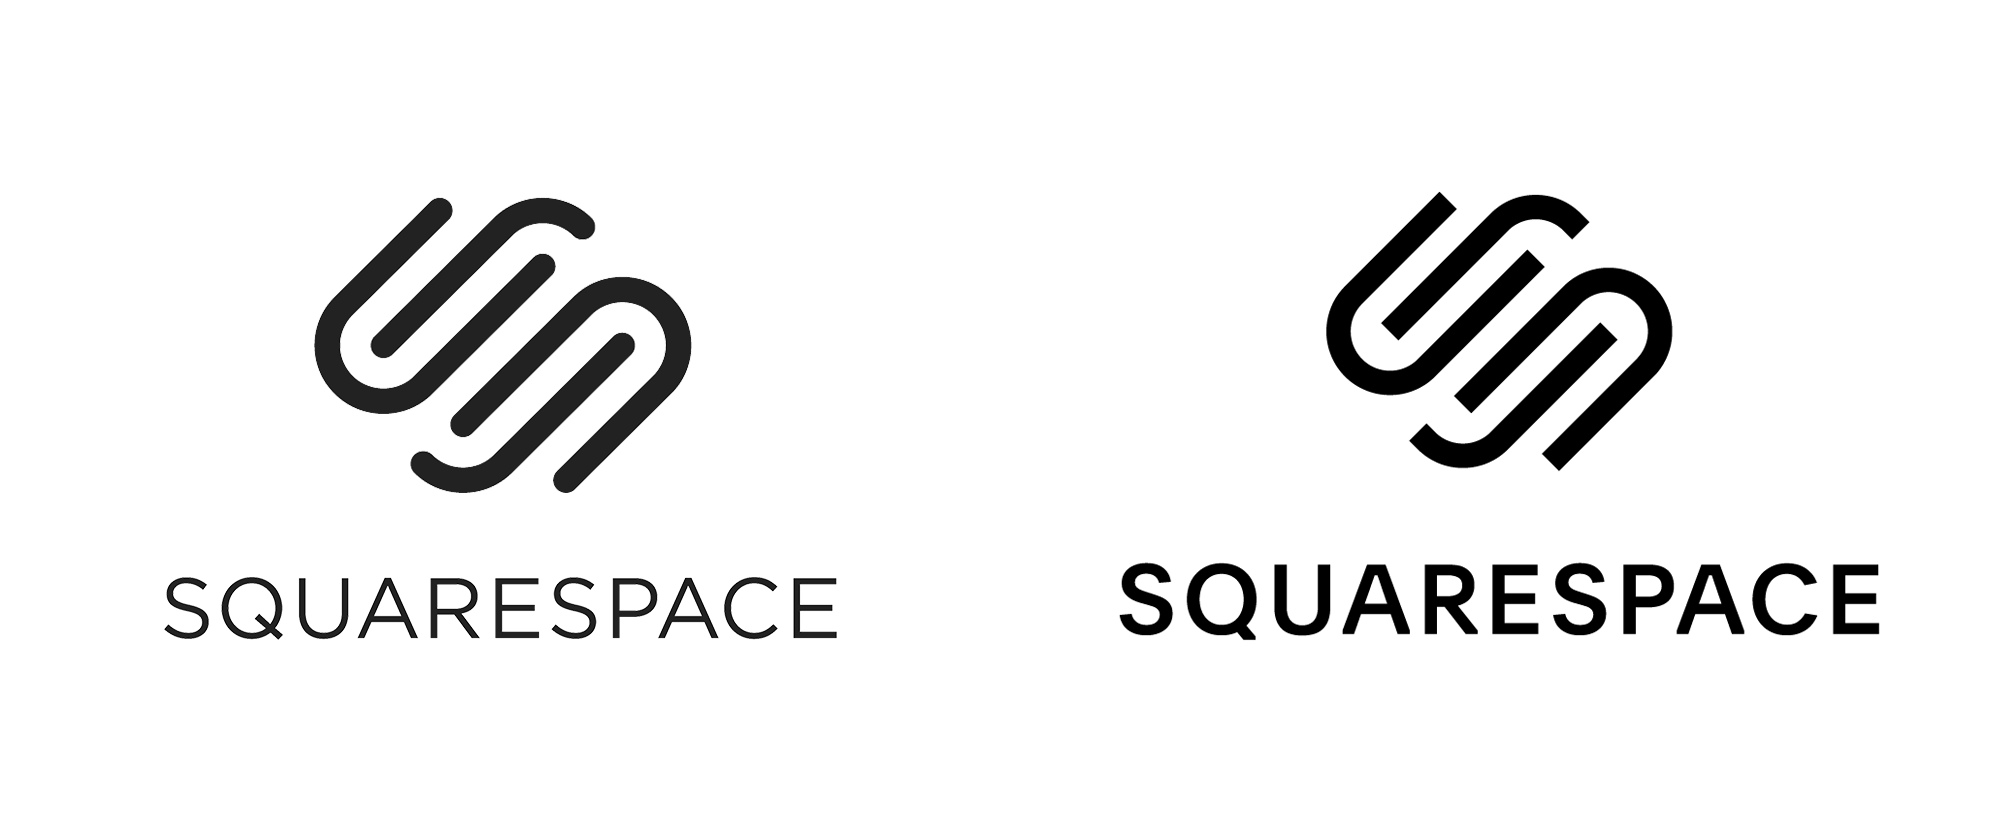 Squarespace Logo - Brand New: New Logo and Identity for Squarespace by DIA